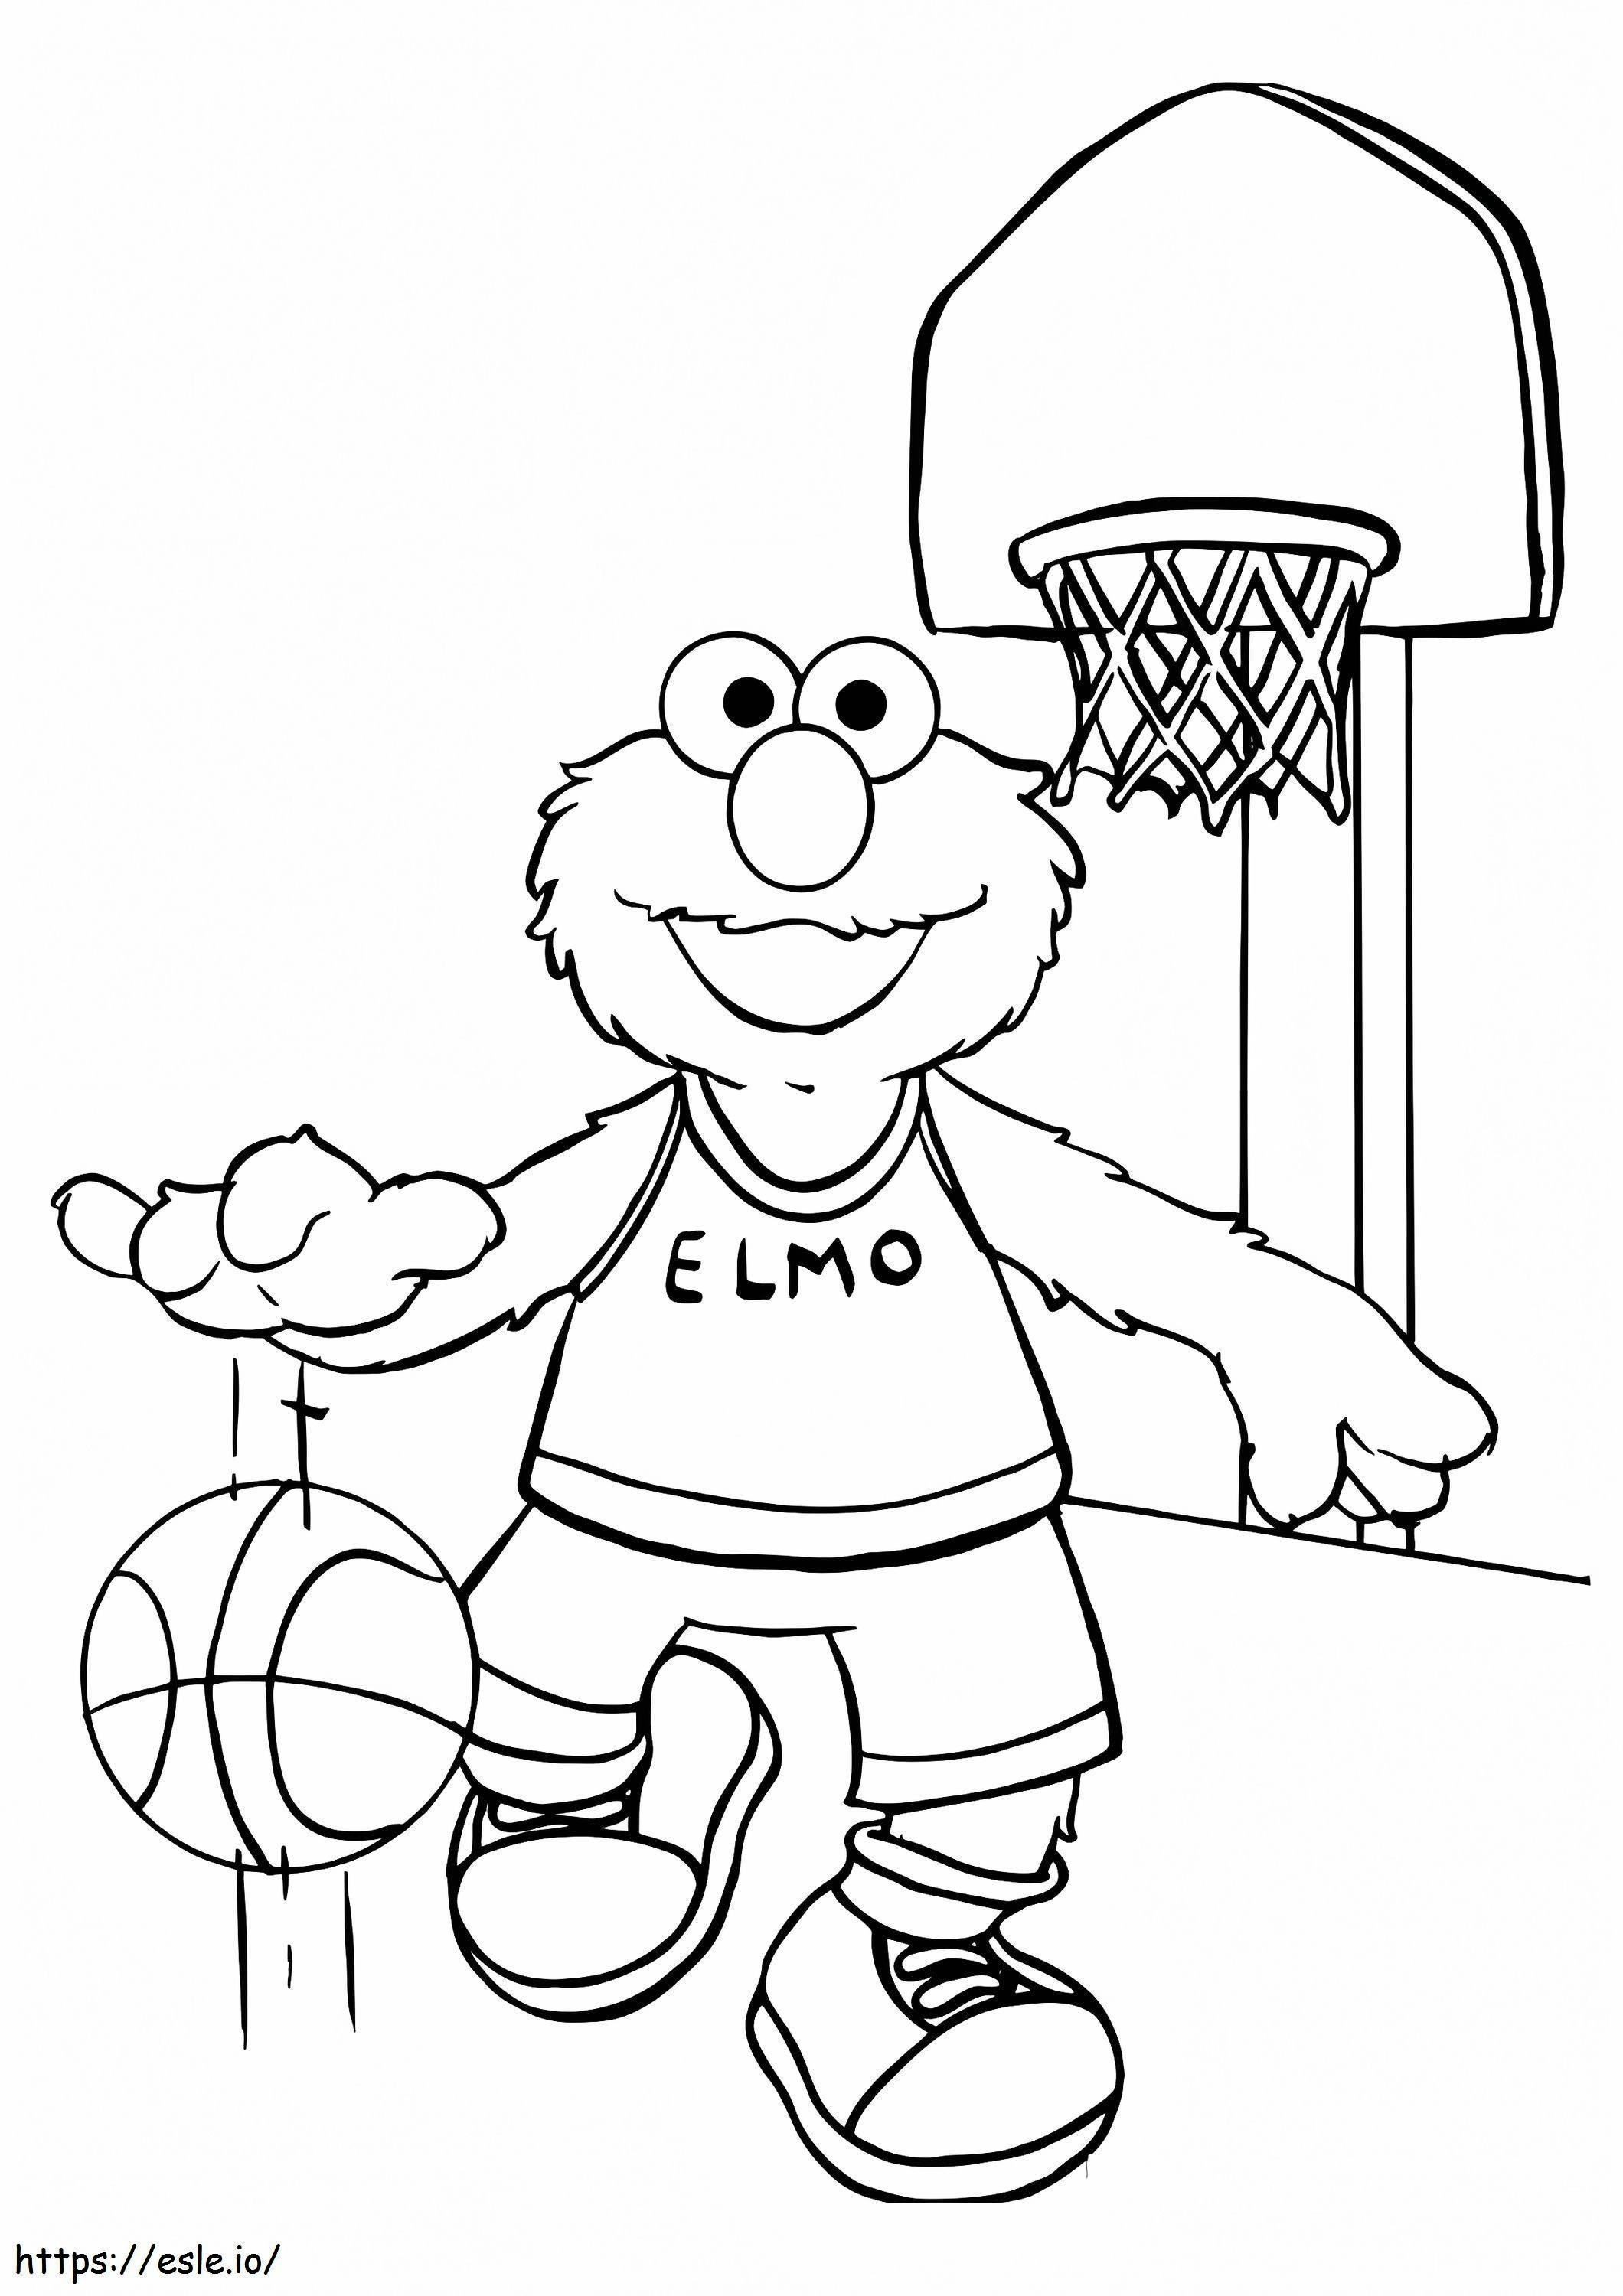 1526906143 Elmo Playing Happily With Busketball A4 coloring page